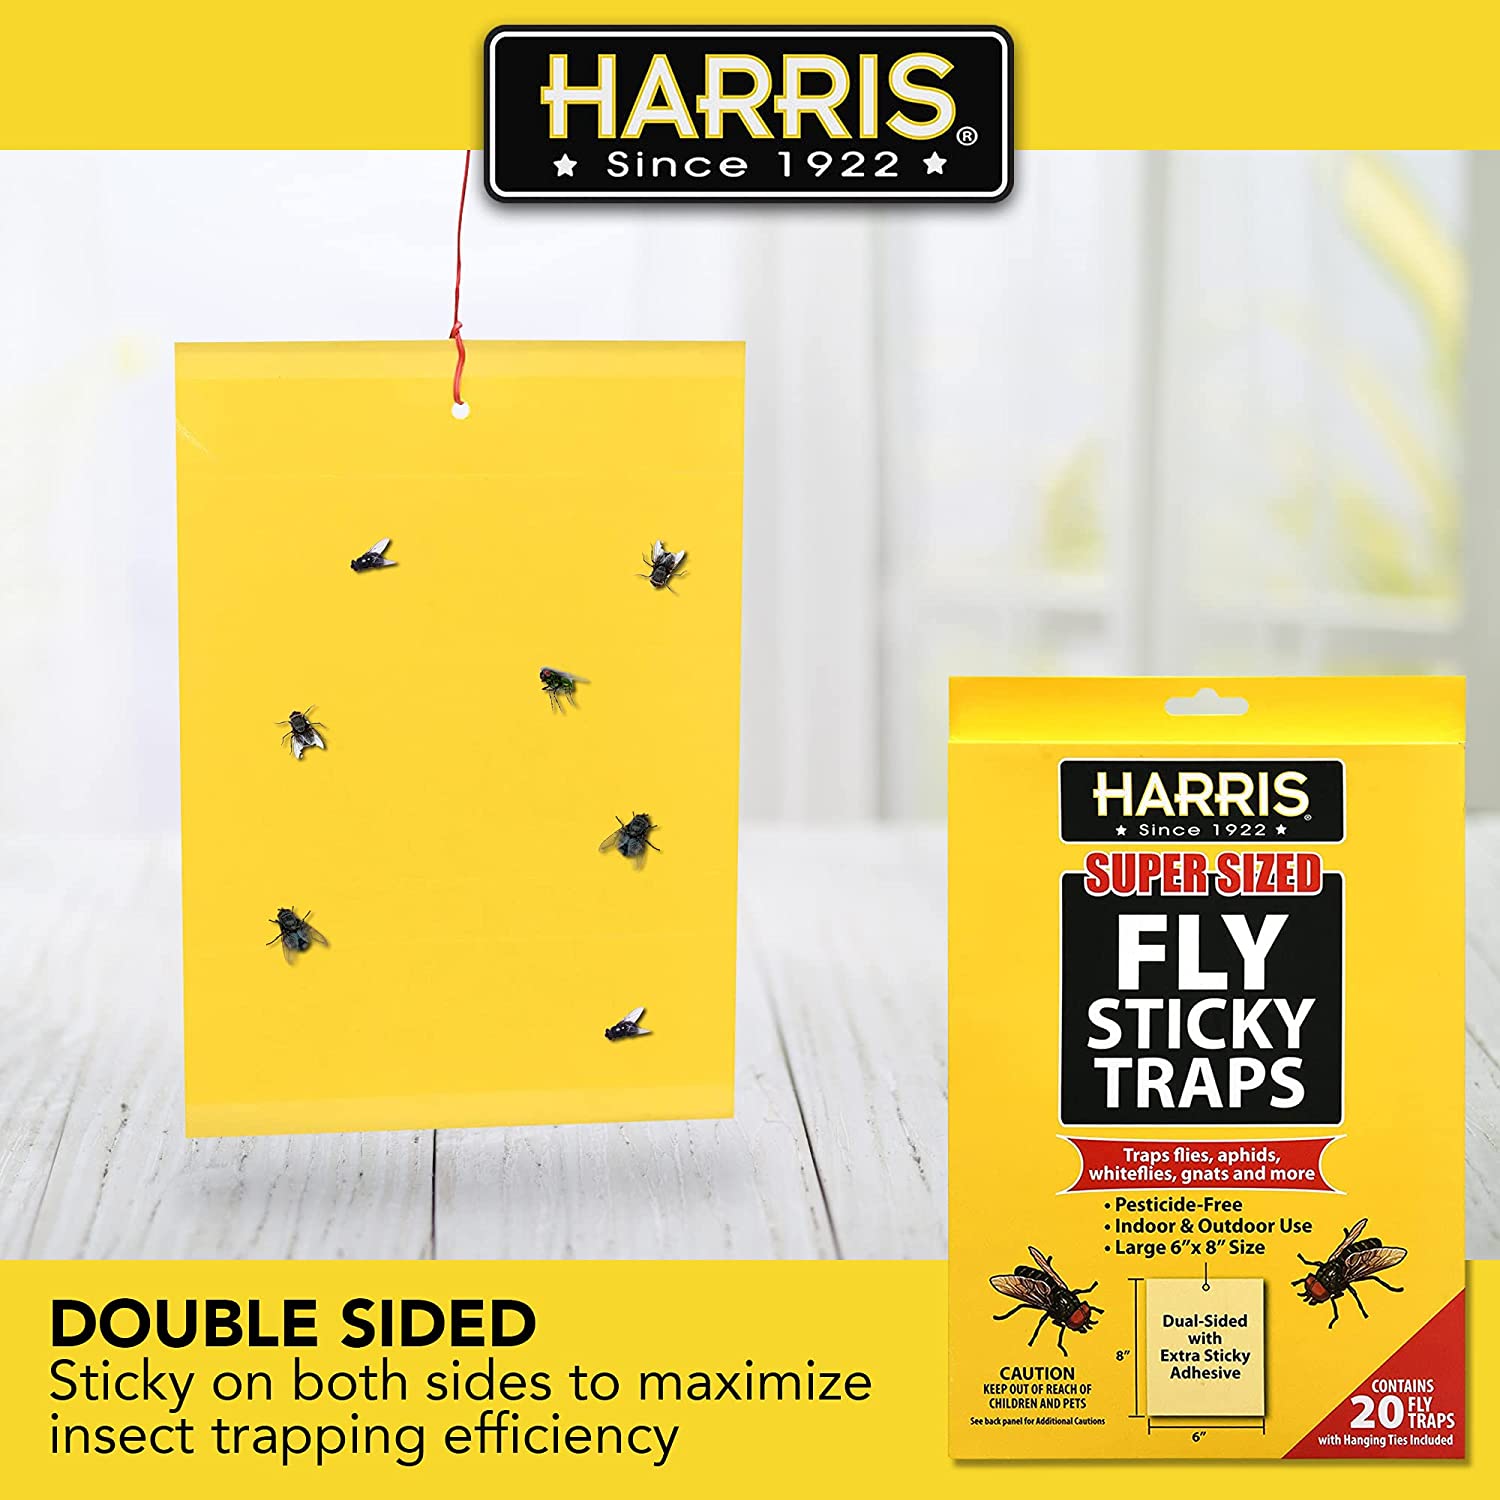 Fly Traps Outdoor & Fly Trap Tubes For Indoors, Long Lasting Adhesive  Hanging Fly Sticky Trap Sticks For Catching House Flies, Horse Flies,  Gnats, Mosquitoes, Wasps, Bugs, Insects, Moths, Fruit Flies, Spiders